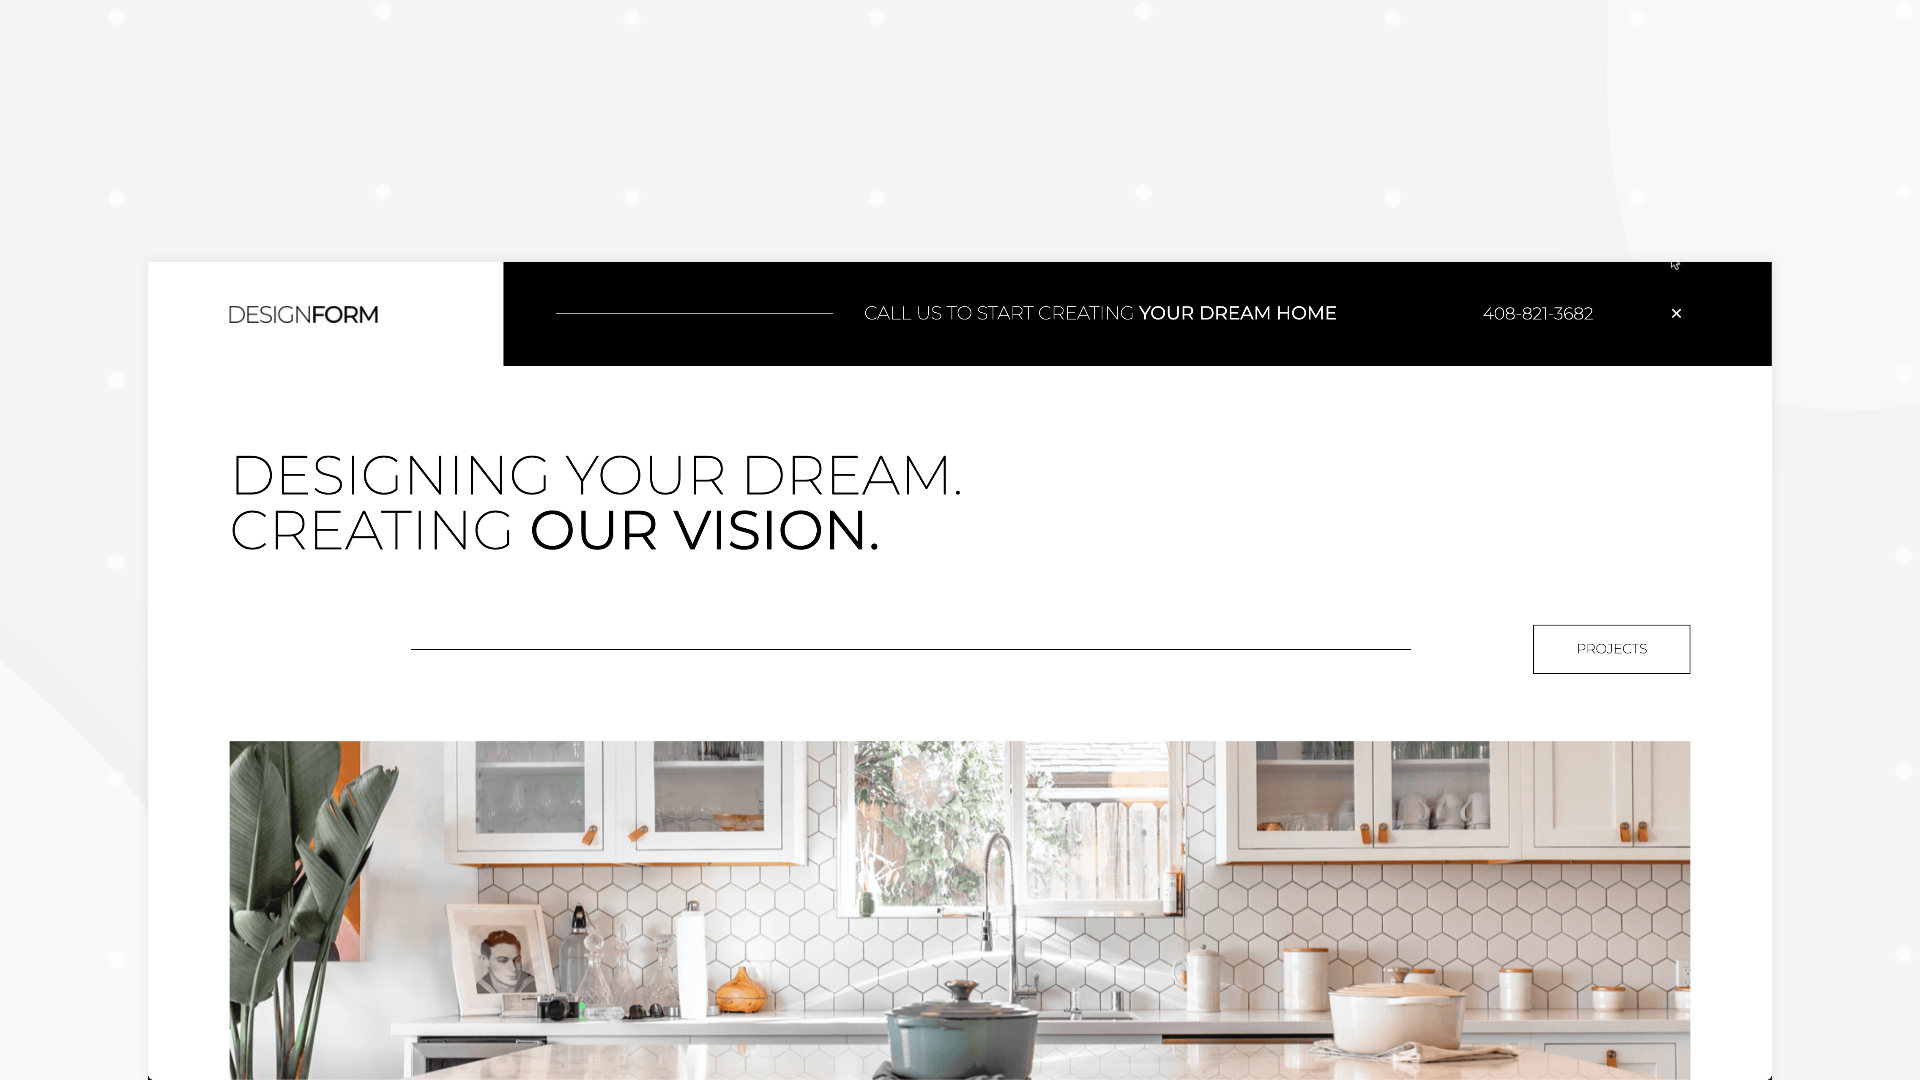 Popup Mobile Monthly Template Kits #8: The Interior Design Template Kit 7